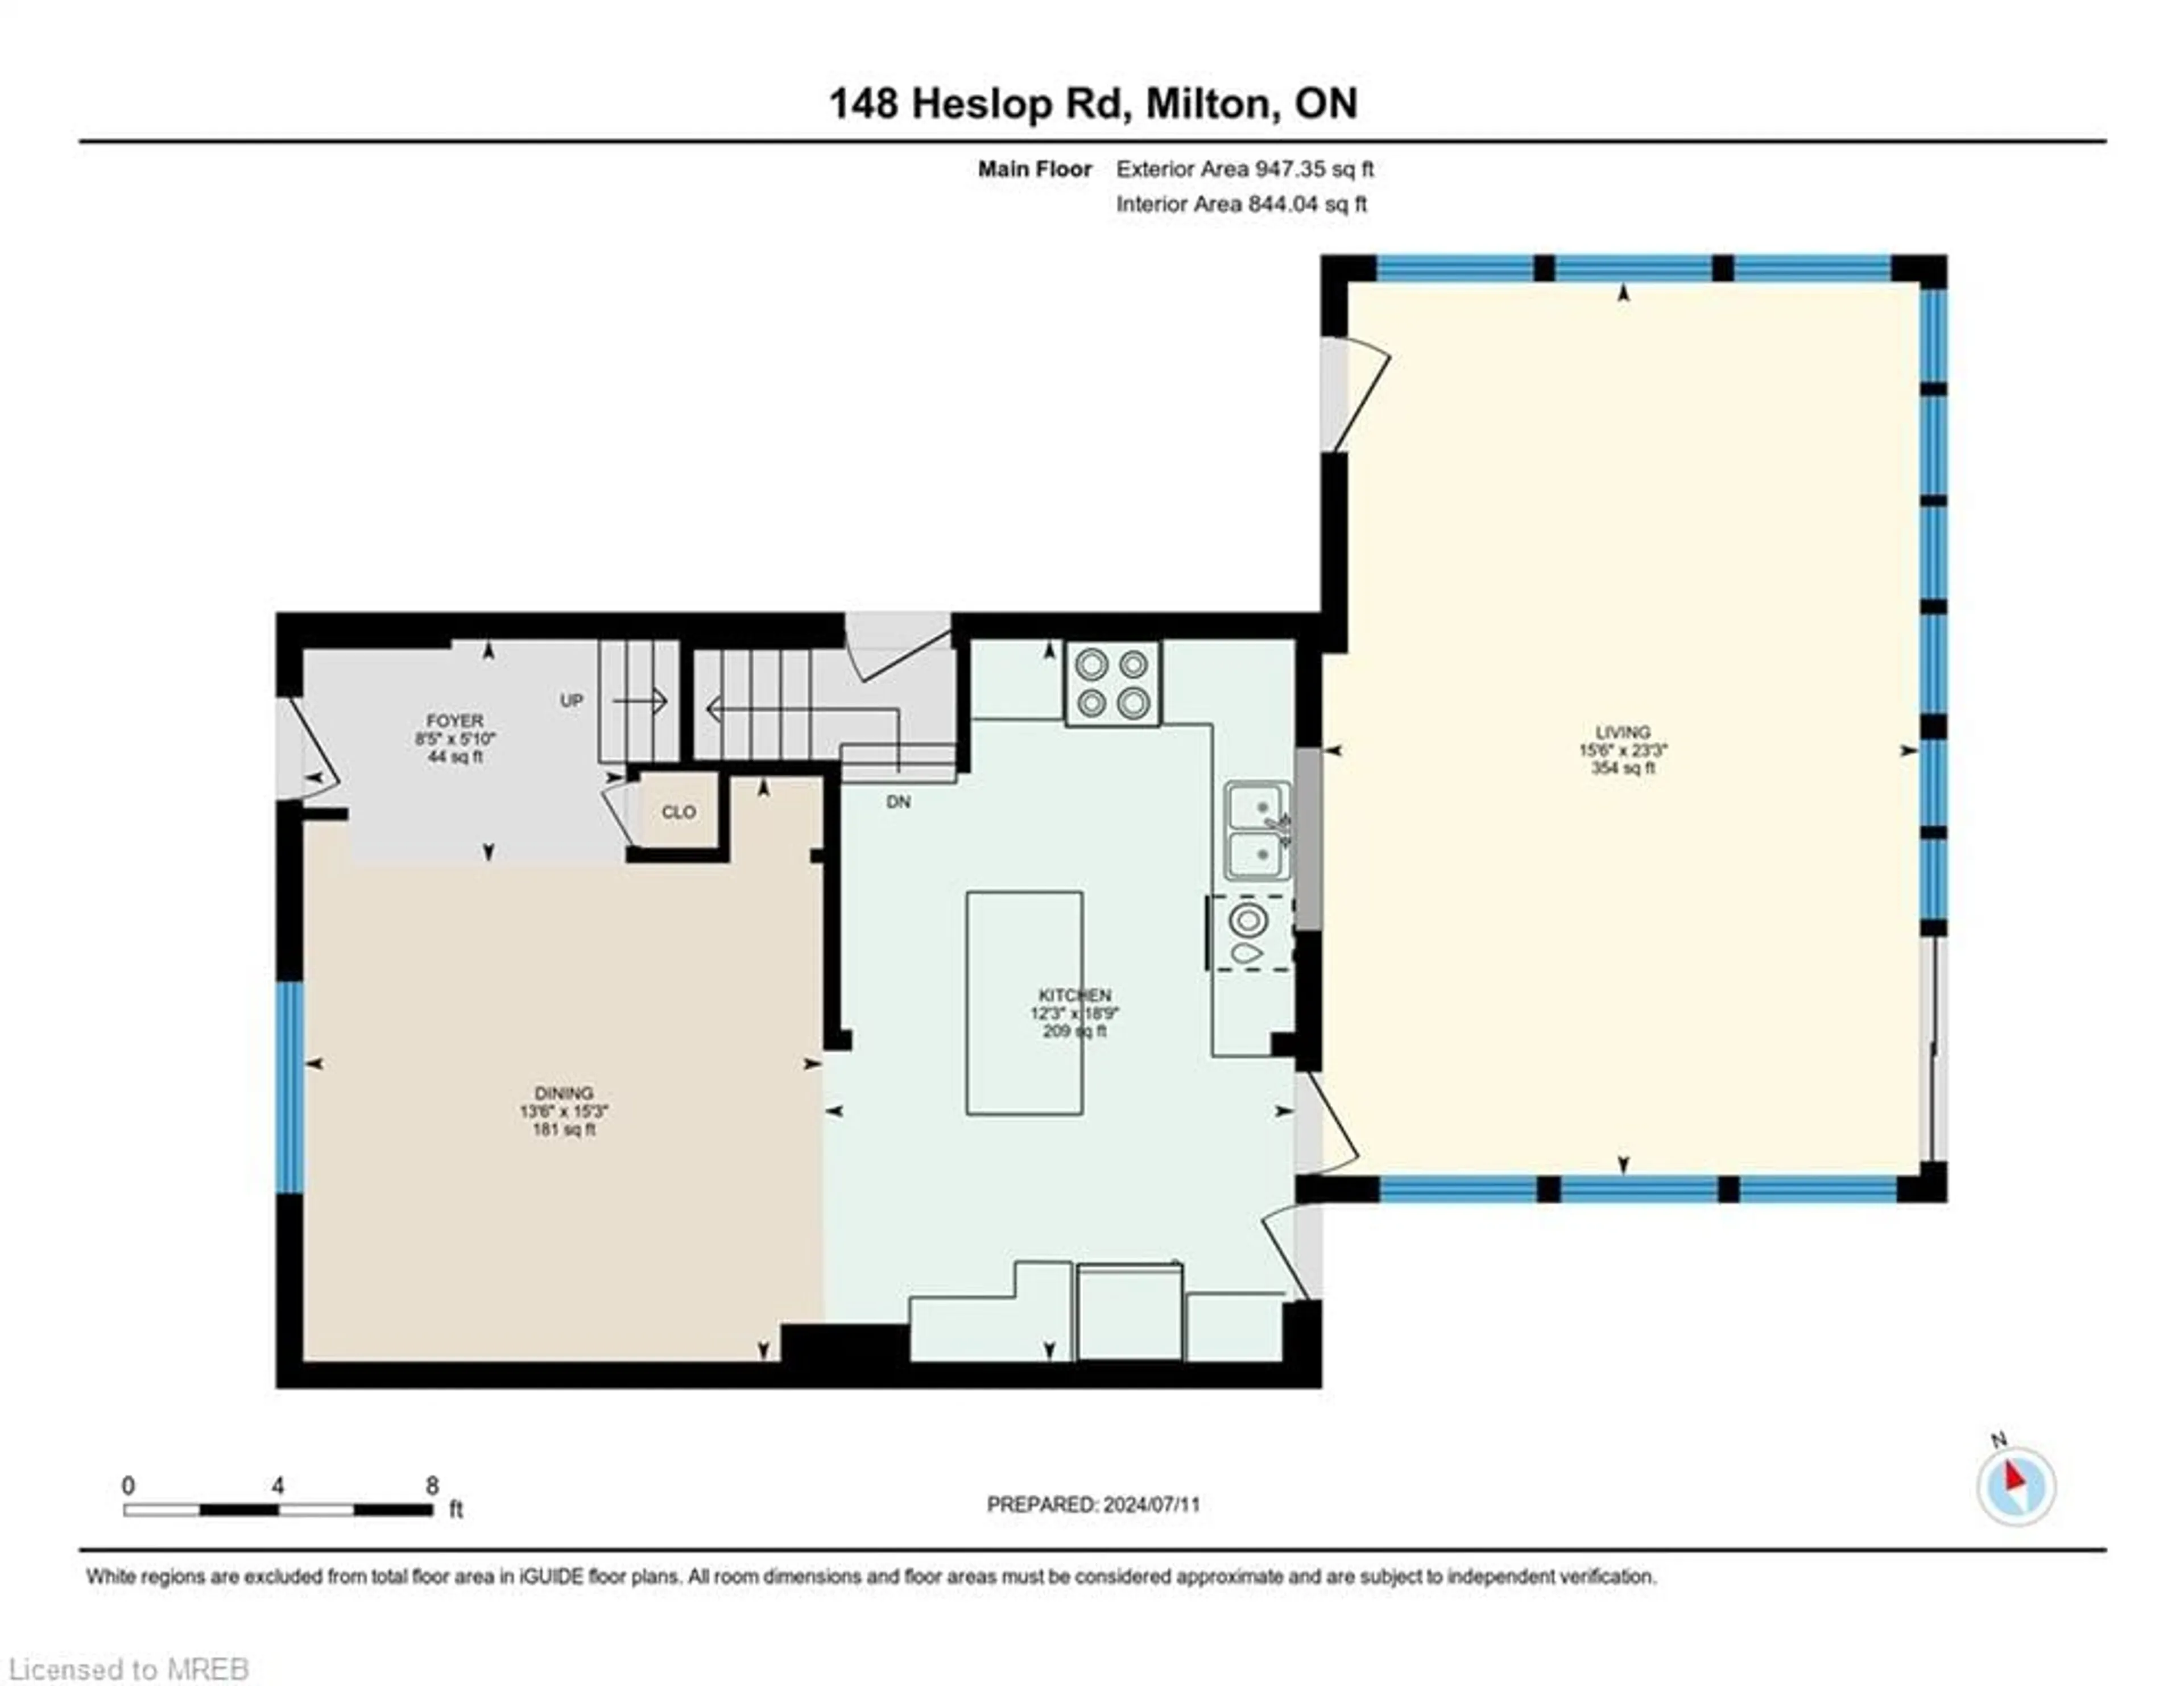 Floor plan for 148 Heslop Rd, Milton Ontario L9T 1B4